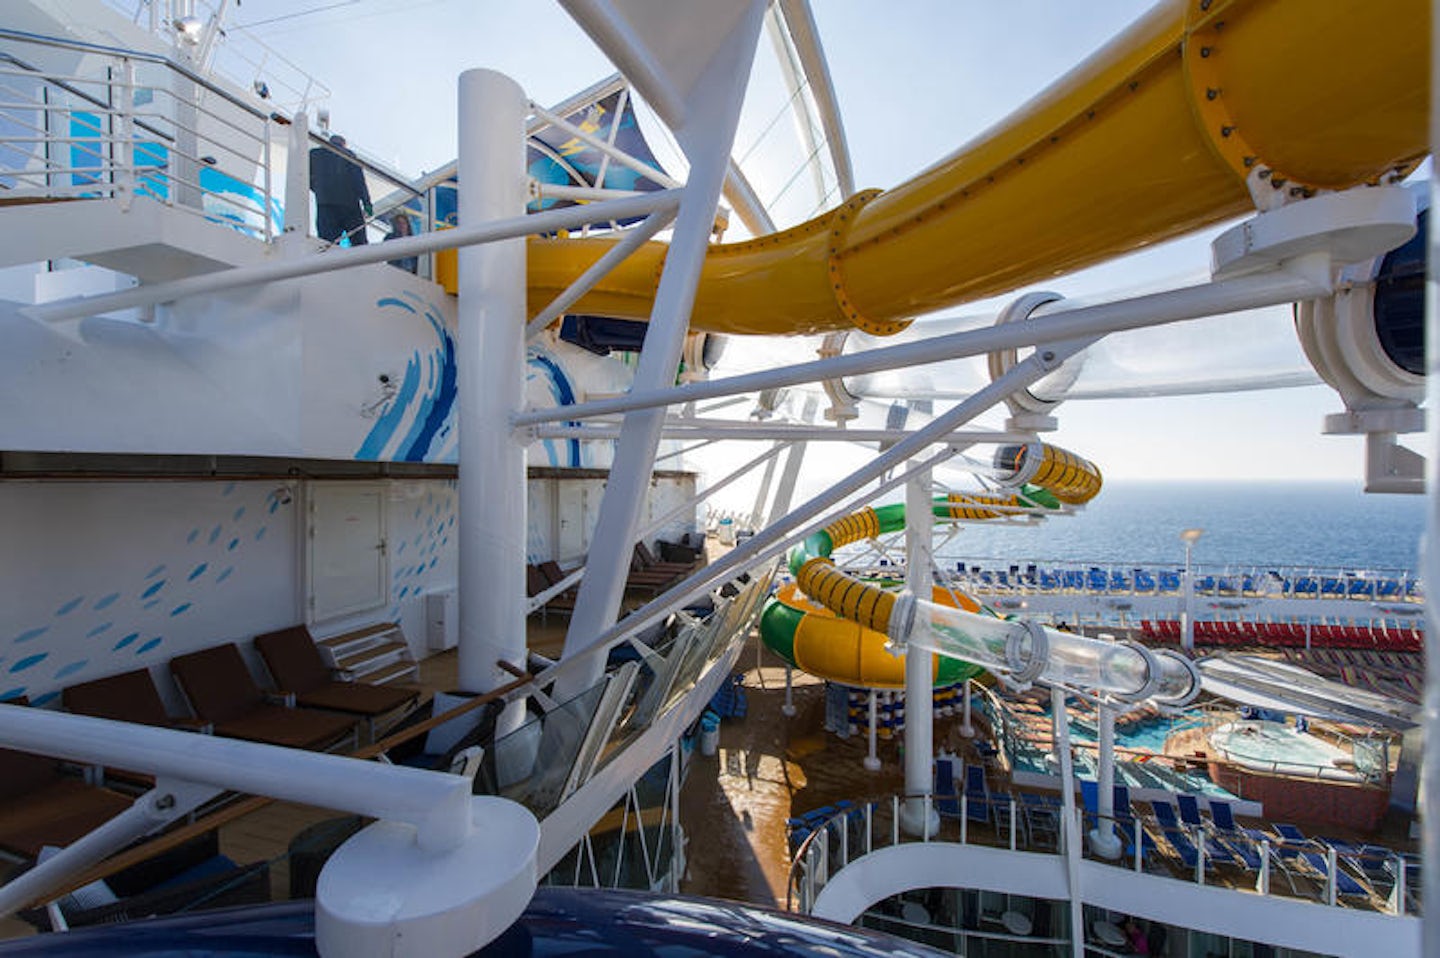 The Perfect Storm on Harmony of the Seas